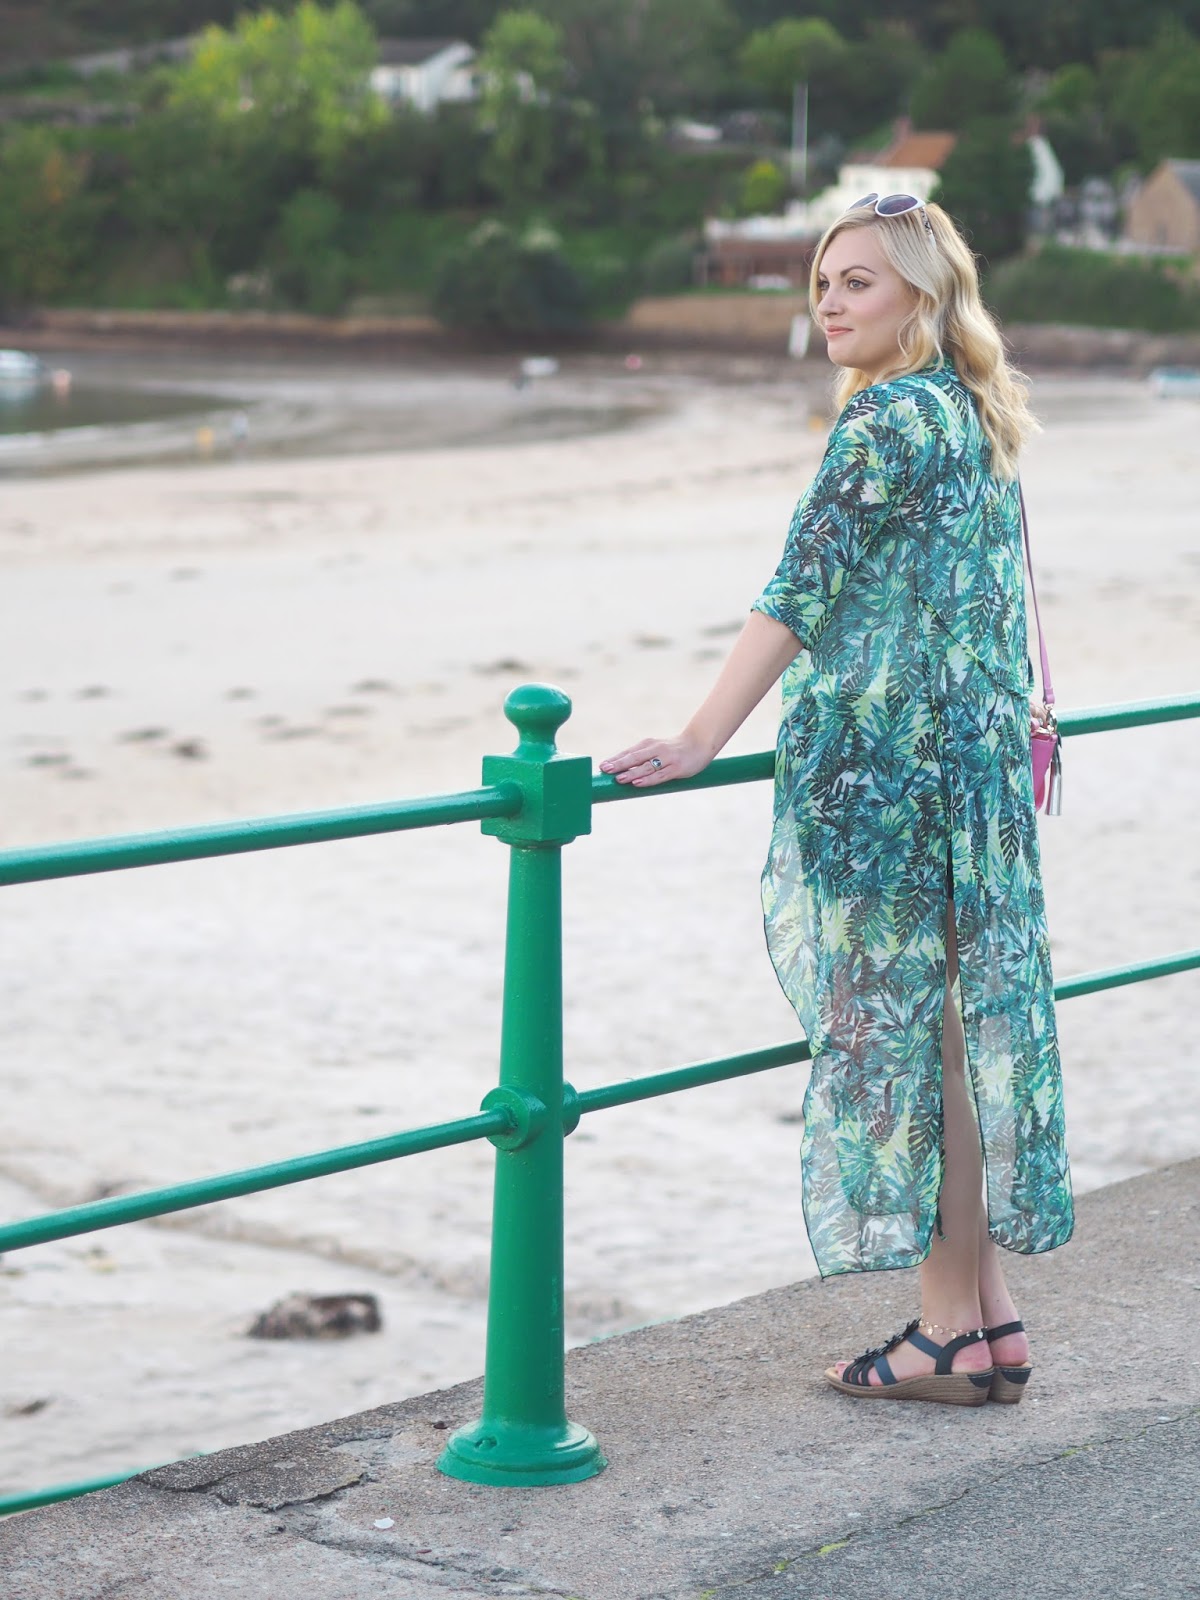 Palm Prints & The Most Perfect Beach, Katie Kirk Loves, UK Blogger, UK Fashion Blogger, Style Blogger, Style Influencer, Boohoo Style, St Brelades Bay, Jersey, Travel Blogger, Channel Islands, Outfit Post, Outfit Of The Day, Skinnydip London, Palm Print Fashion, And Mary Jewellery